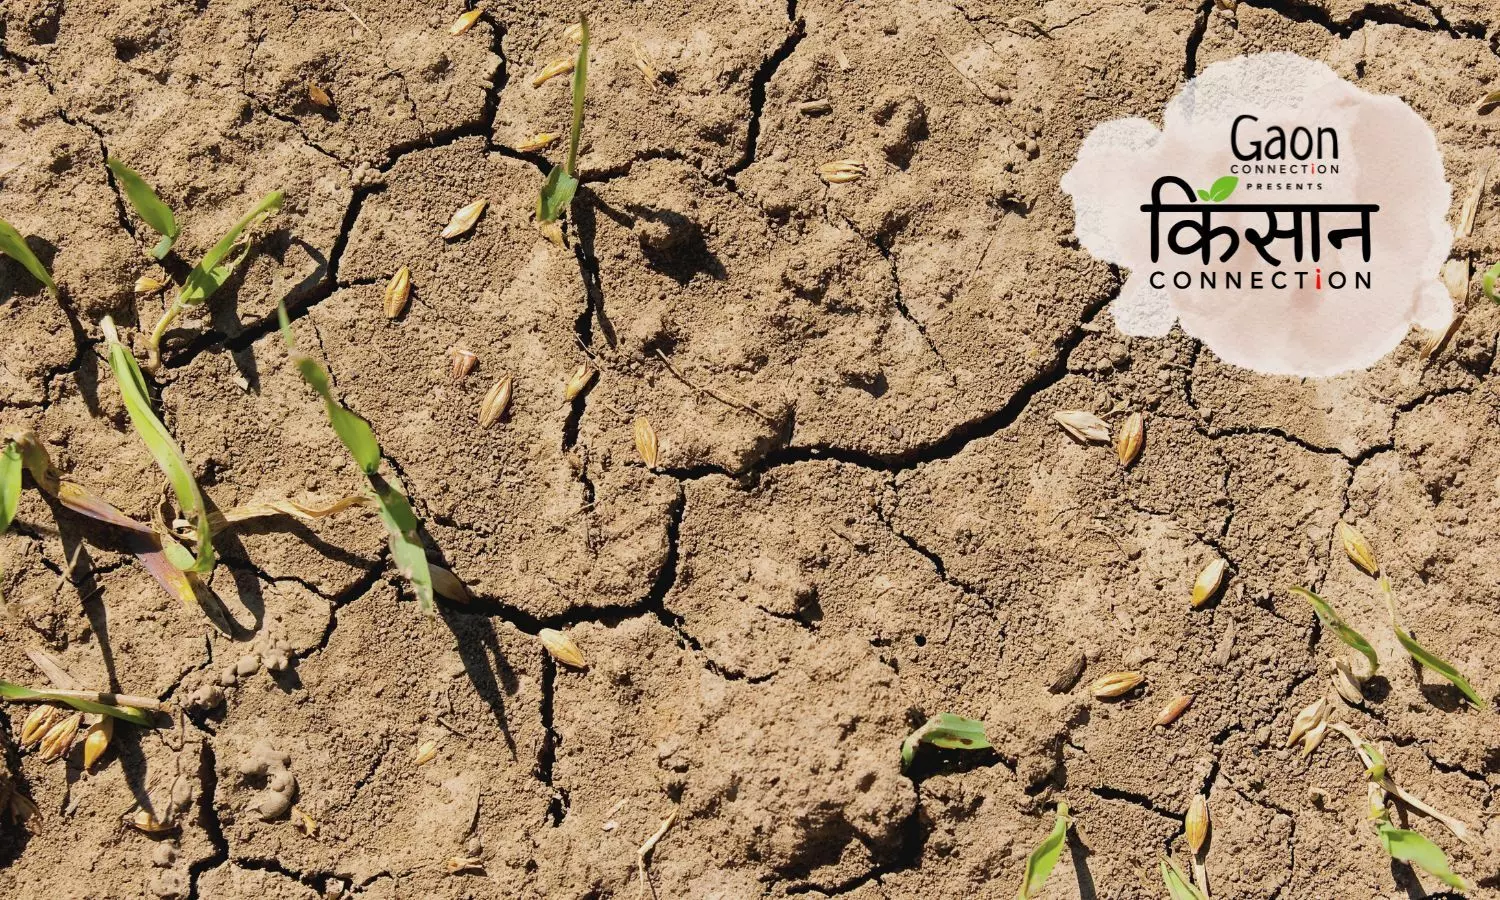 Farmer groups in Maharashtra demand declaration of drought; deficient monsoon rainfall a concern in Peninsular India